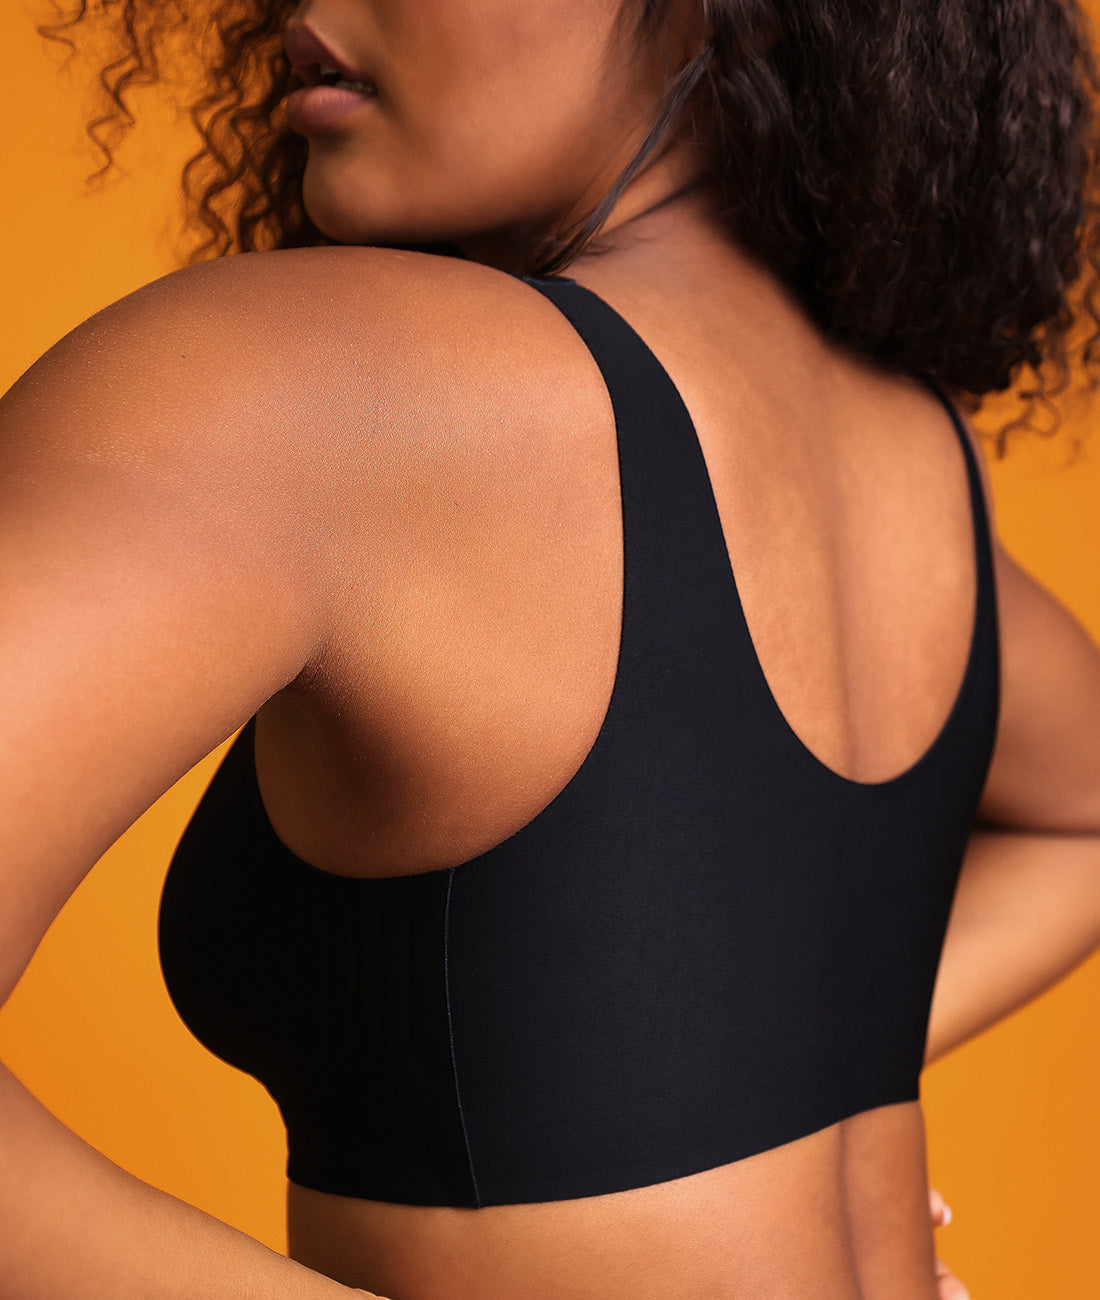 Knix CA: This bra knows all your curves & edges